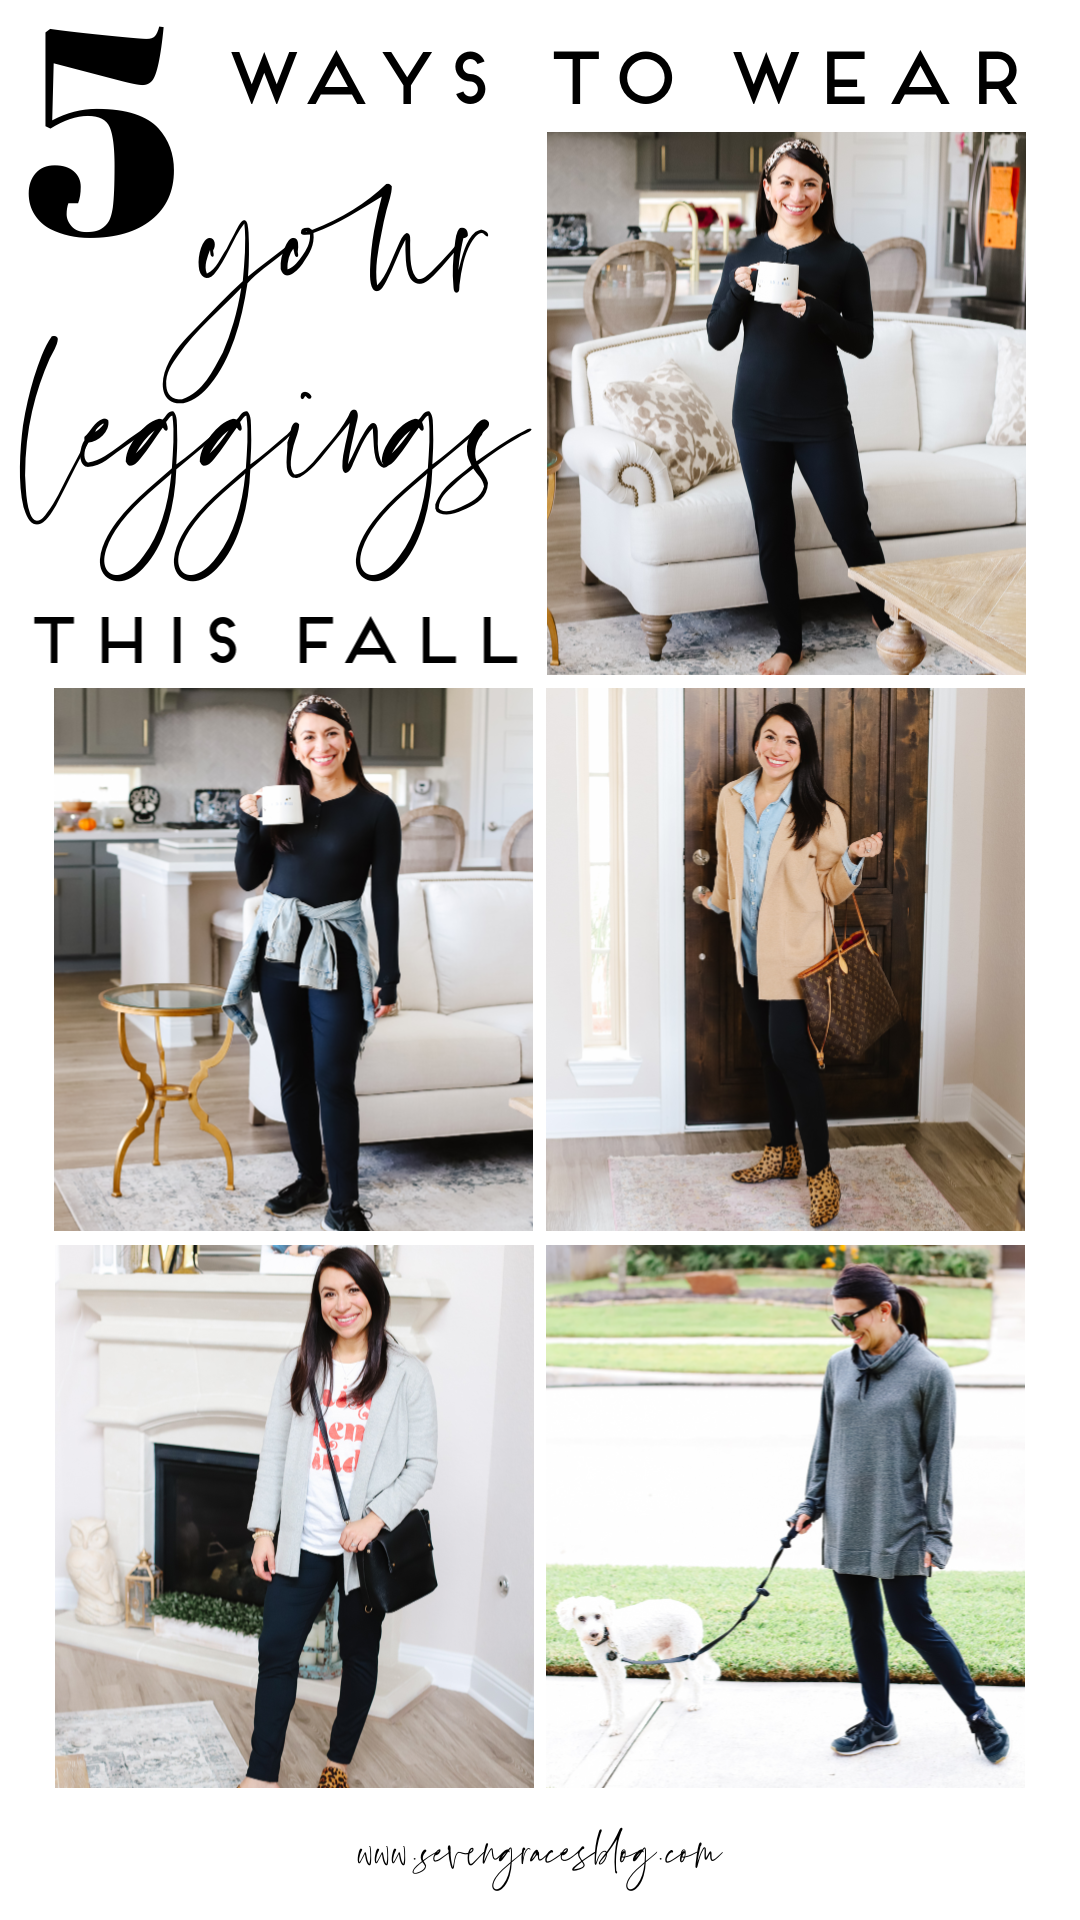 How to Wear Leggings: 5 easy outfits to get the most out of your favorite leggings this fall! What to wear with leggings has never been easier. #ad @cuddlduds @kohls #liveinlayers #fallfashion #leggings